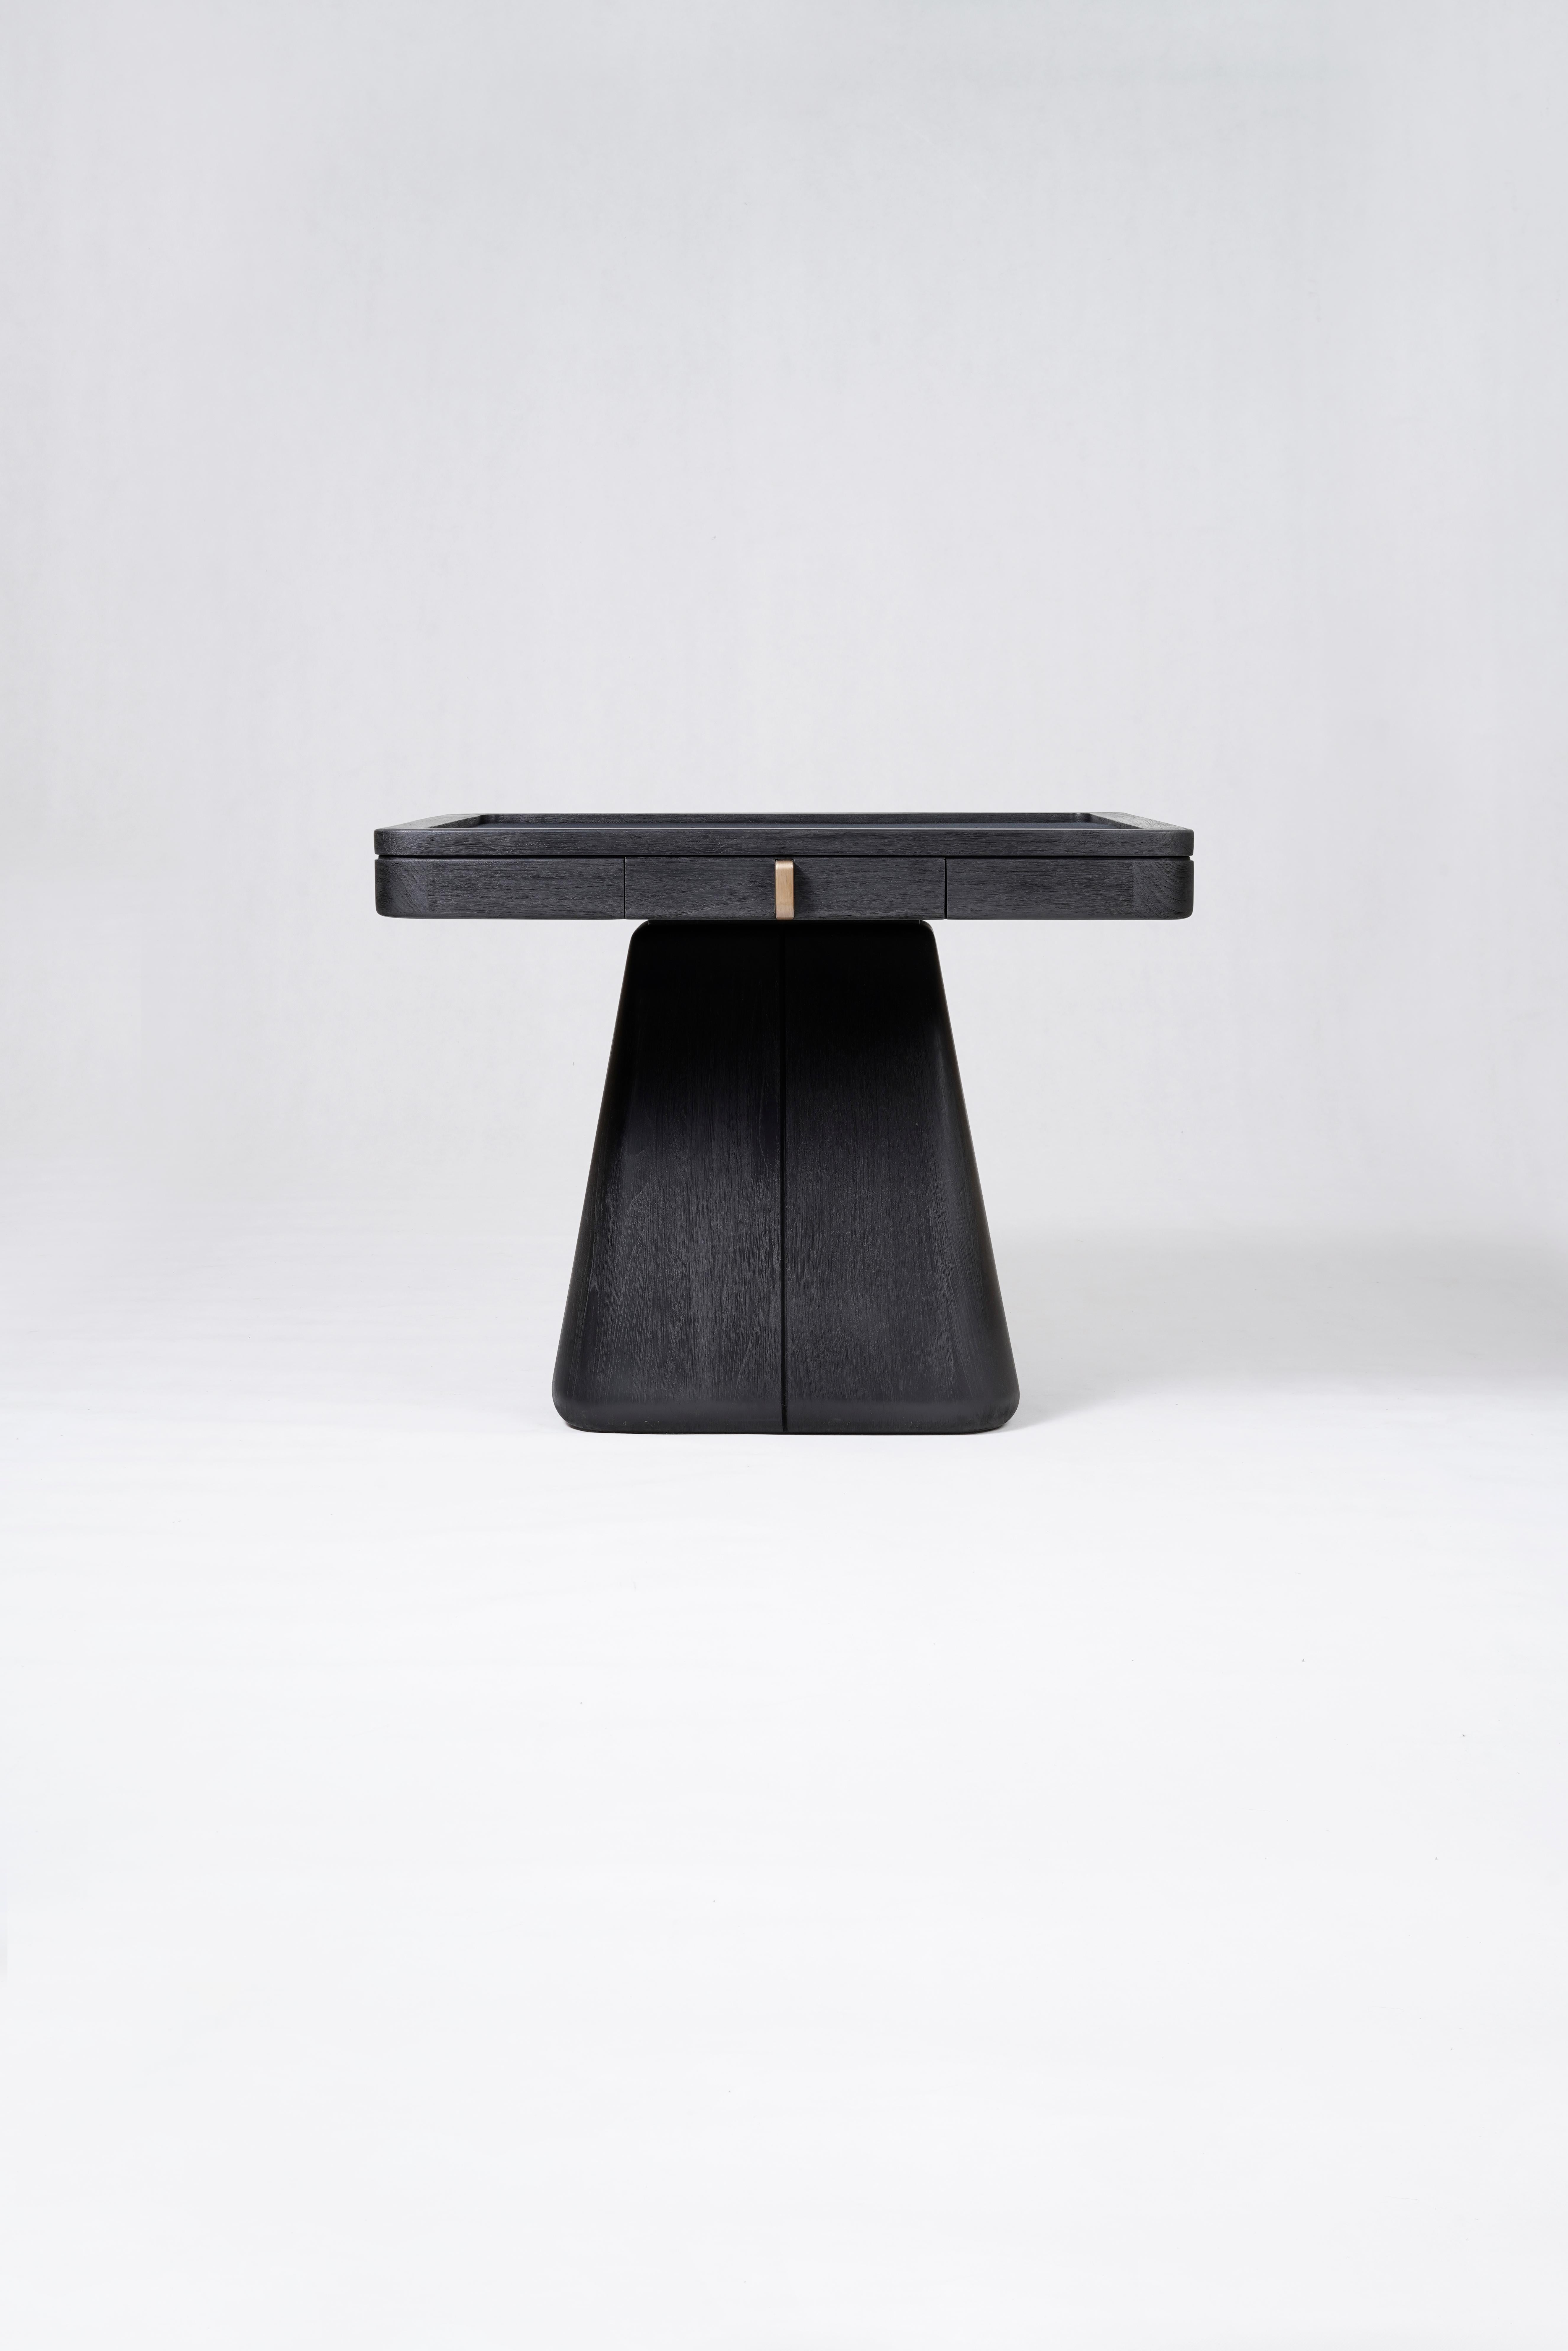 Brass Mahjong Dining Table by Pendhapa